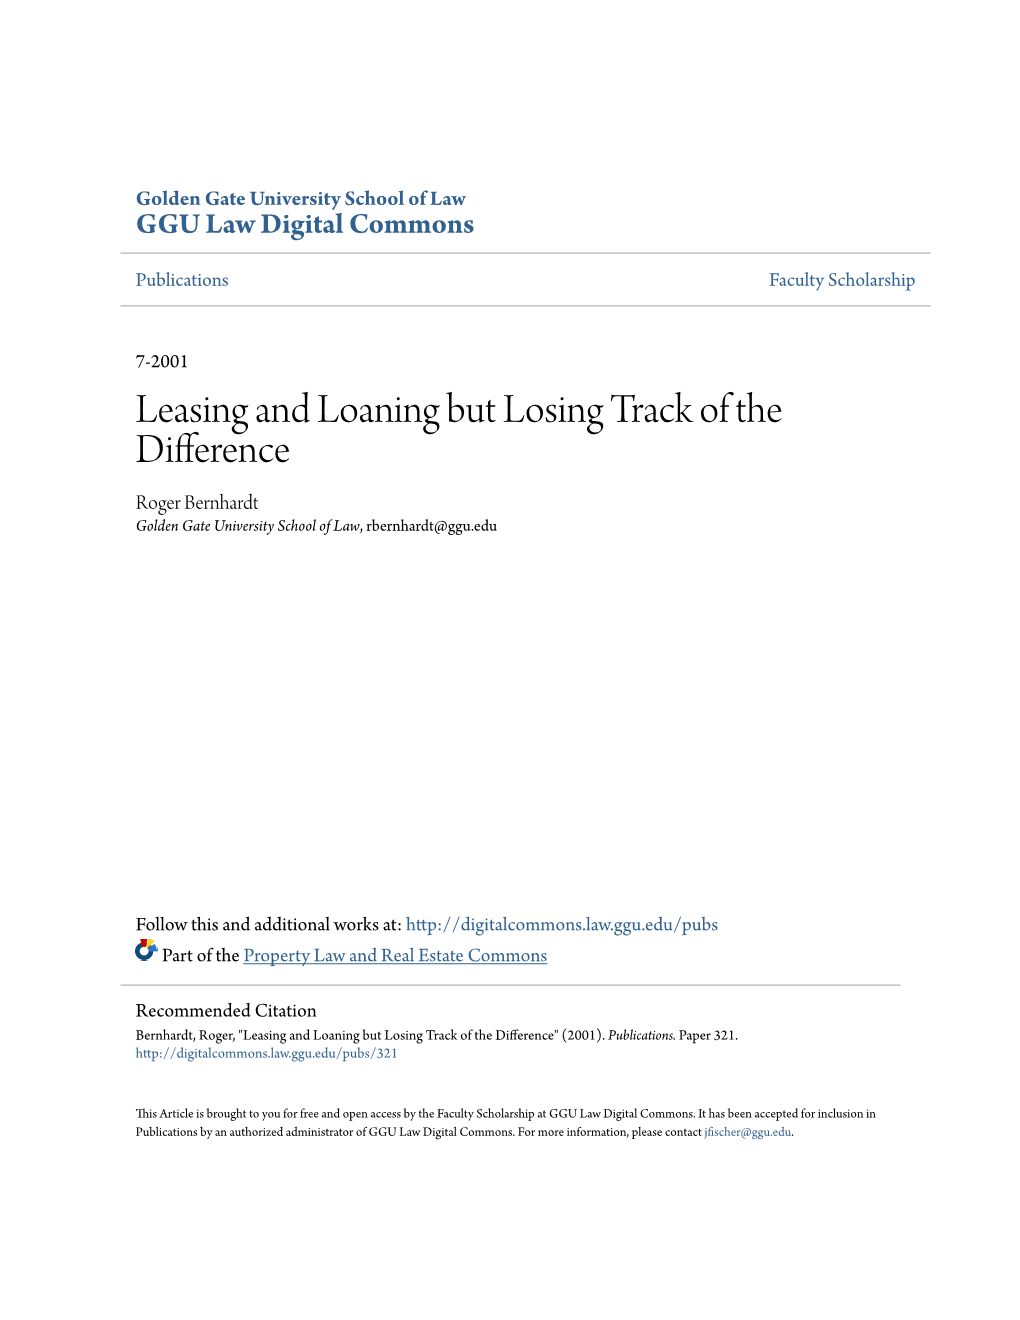 Leasing and Loaning but Losing Track of the Difference Roger Bernhardt Golden Gate University School of Law, Rbernhardt@Ggu.Edu